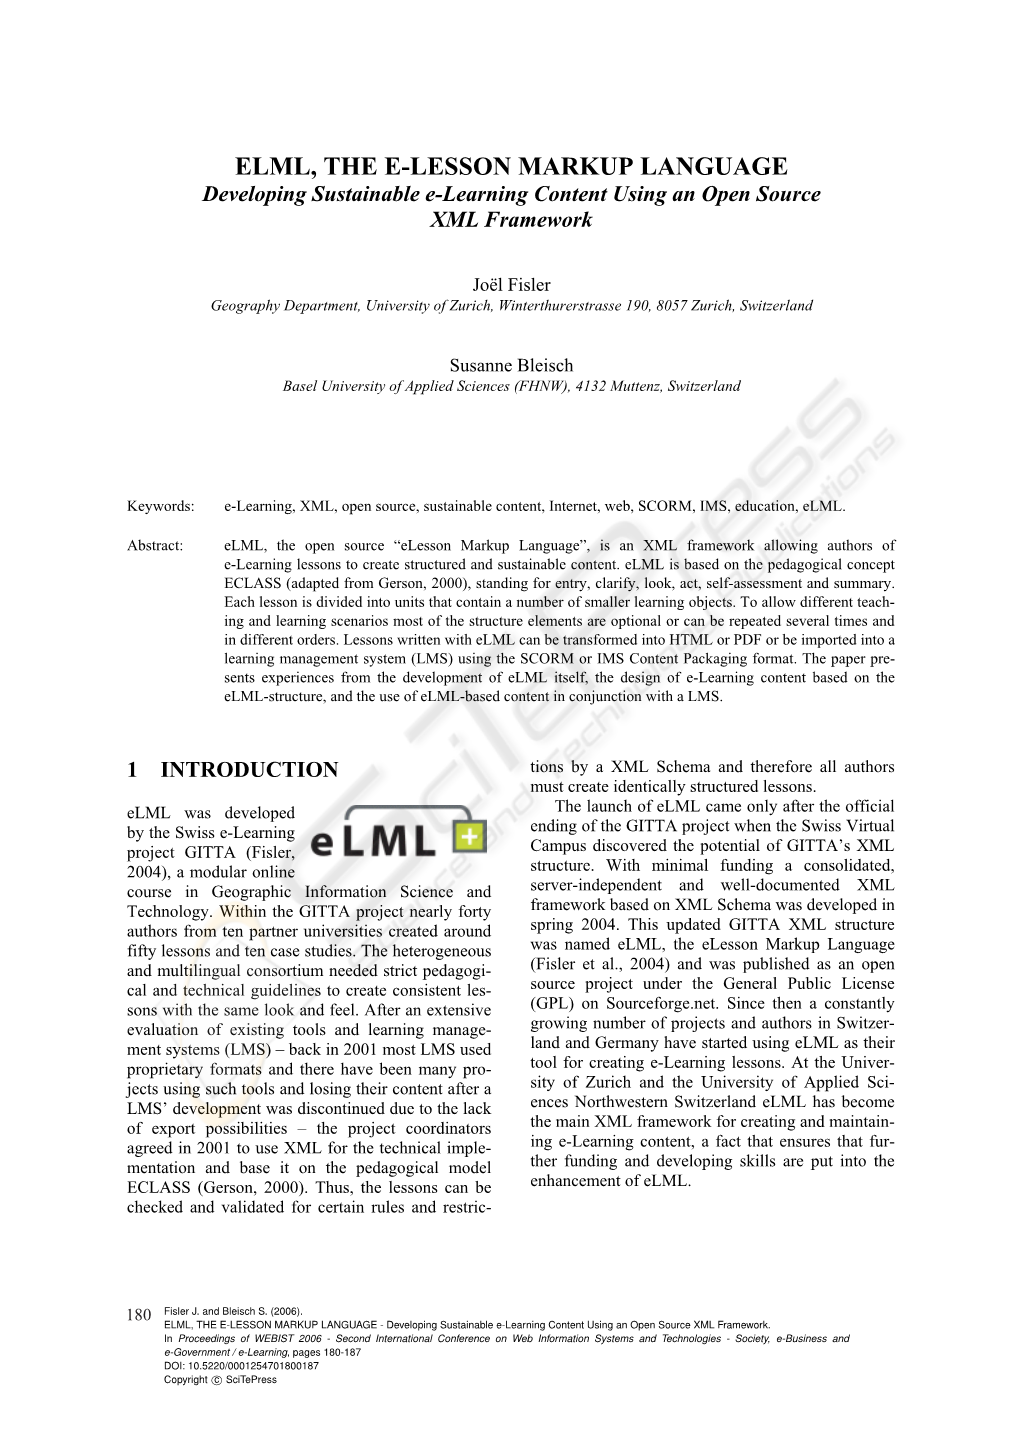 ELML, the E-LESSON MARKUP LANGUAGE Developing Sustainable E-Learning Content Using an Open Source XML Framework